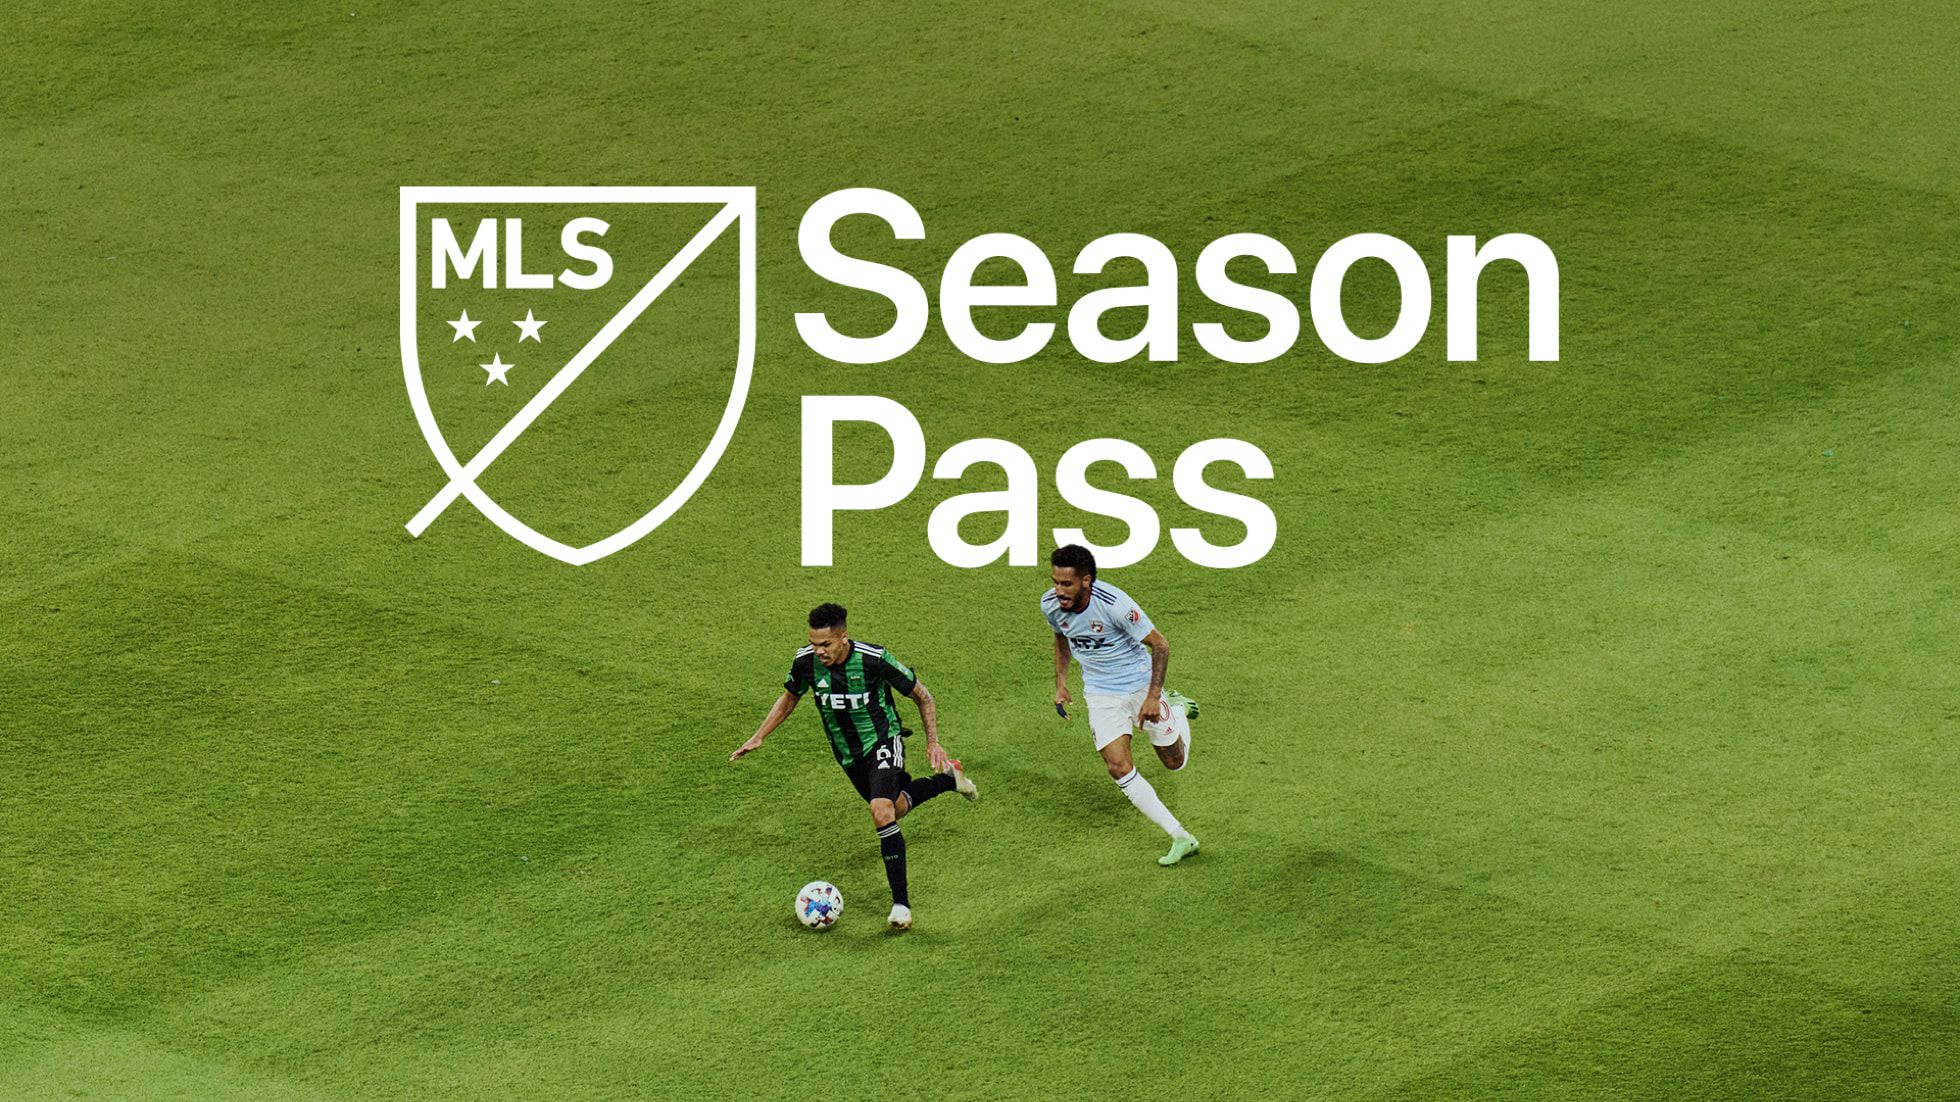 Apple Immersive Video Featuring 2023 MLS Playoffs Coming to Vision Pro